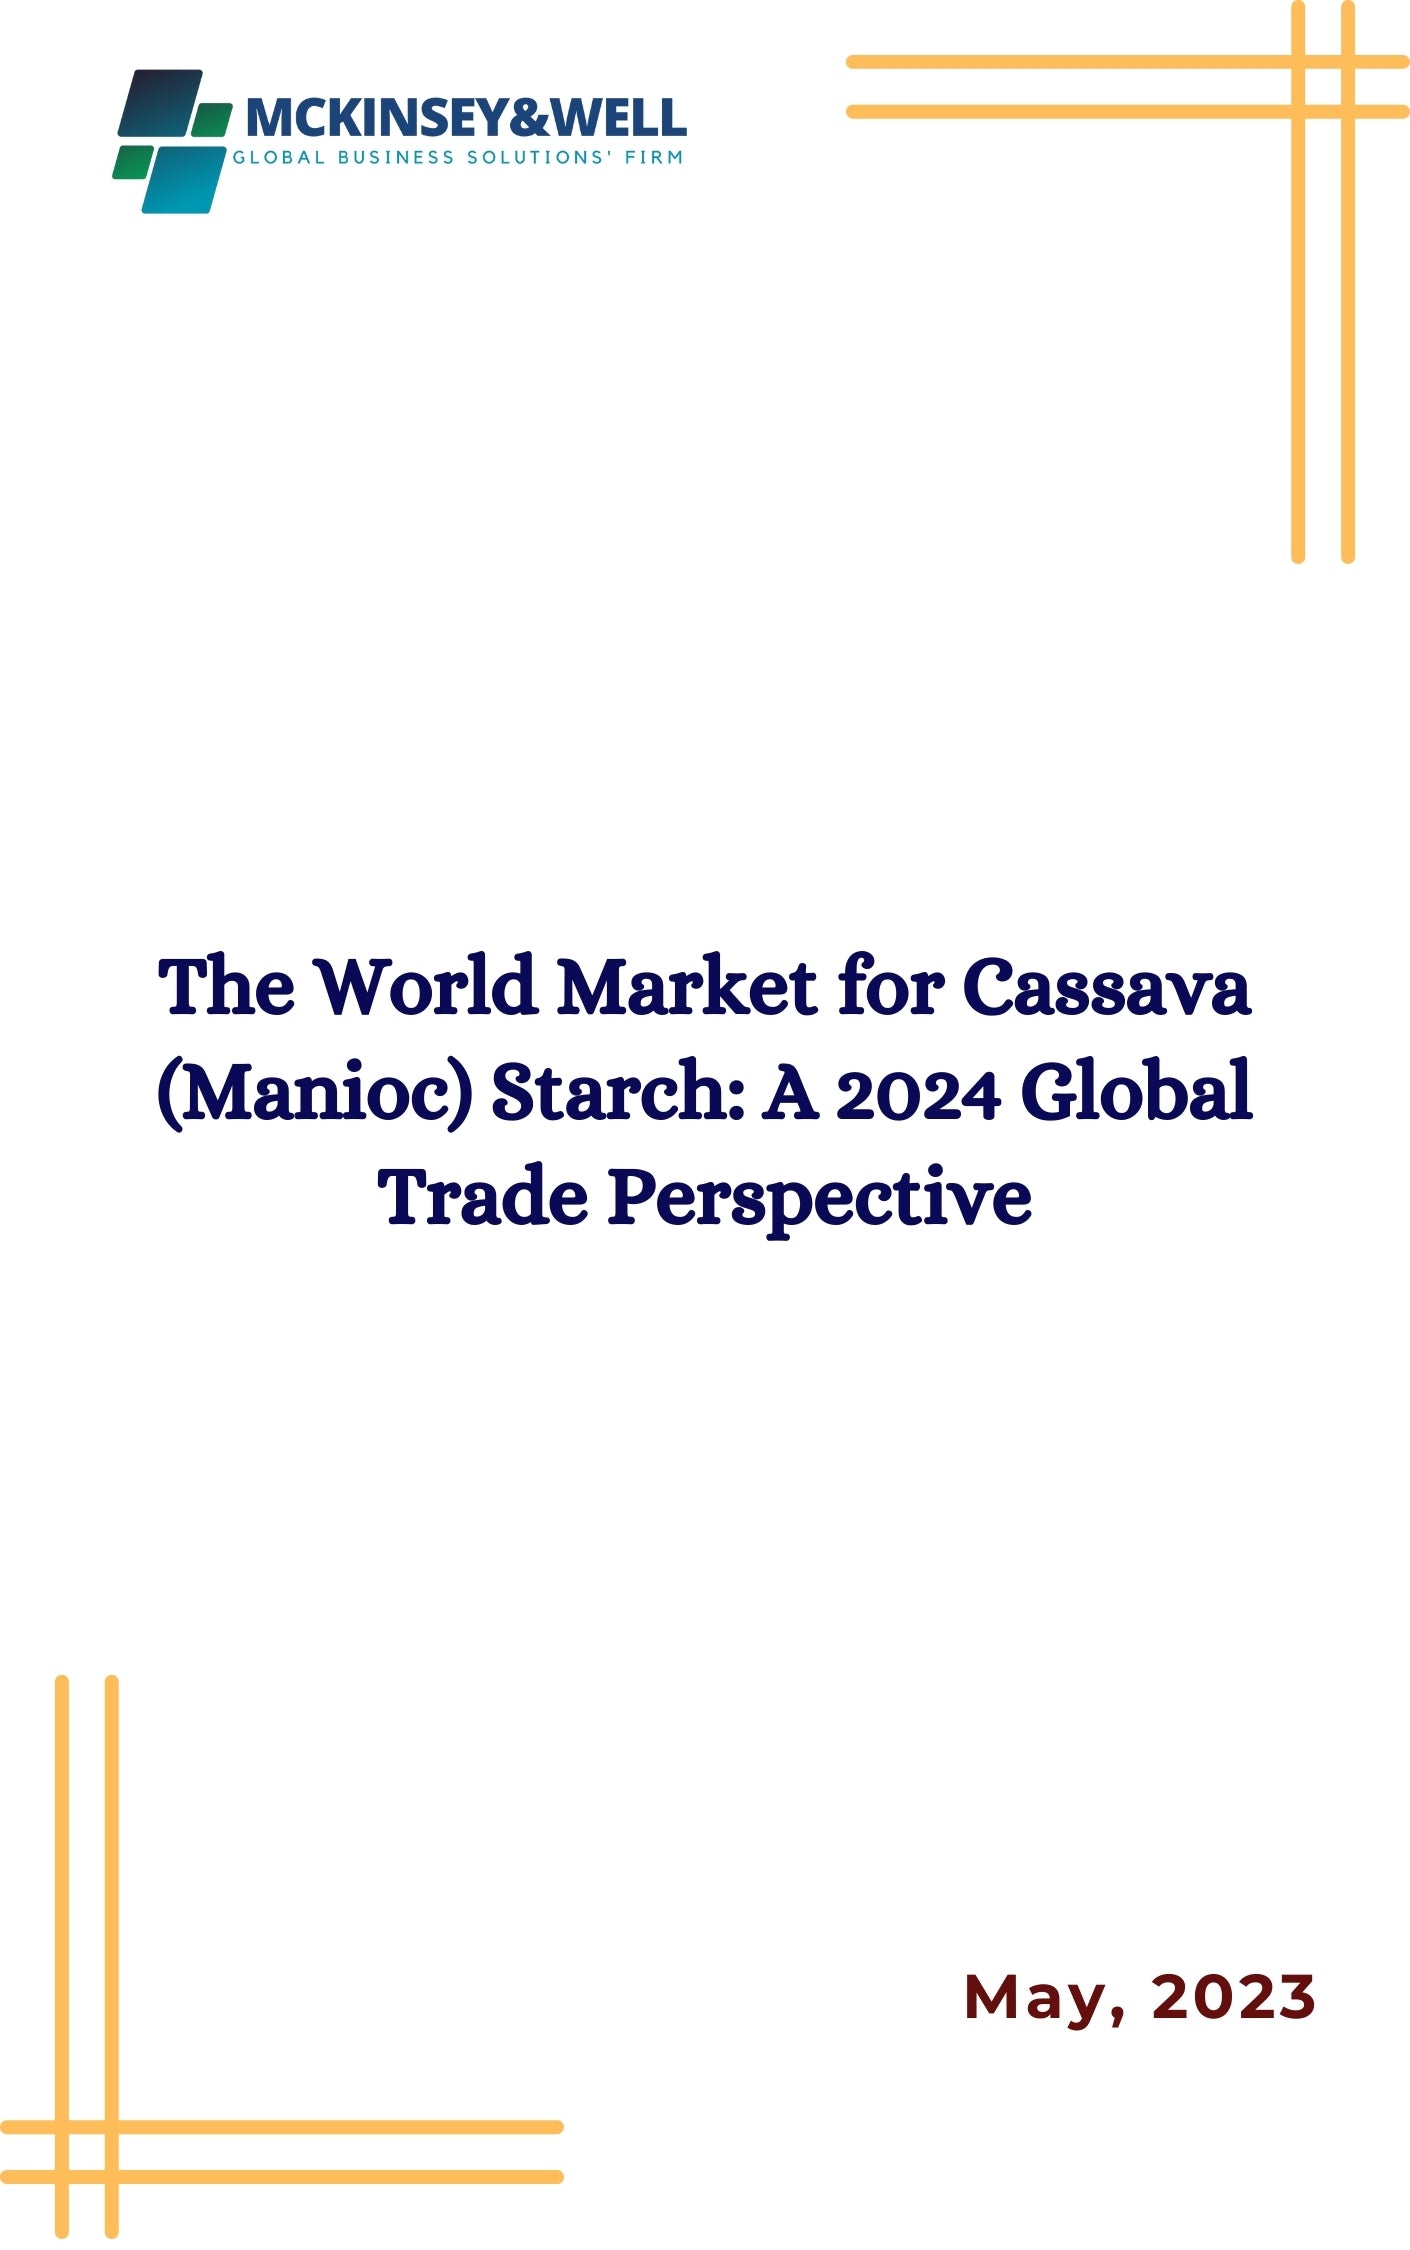 The World Market for Cassava (Manioc) Starch: A 2024 Global Trade Perspective